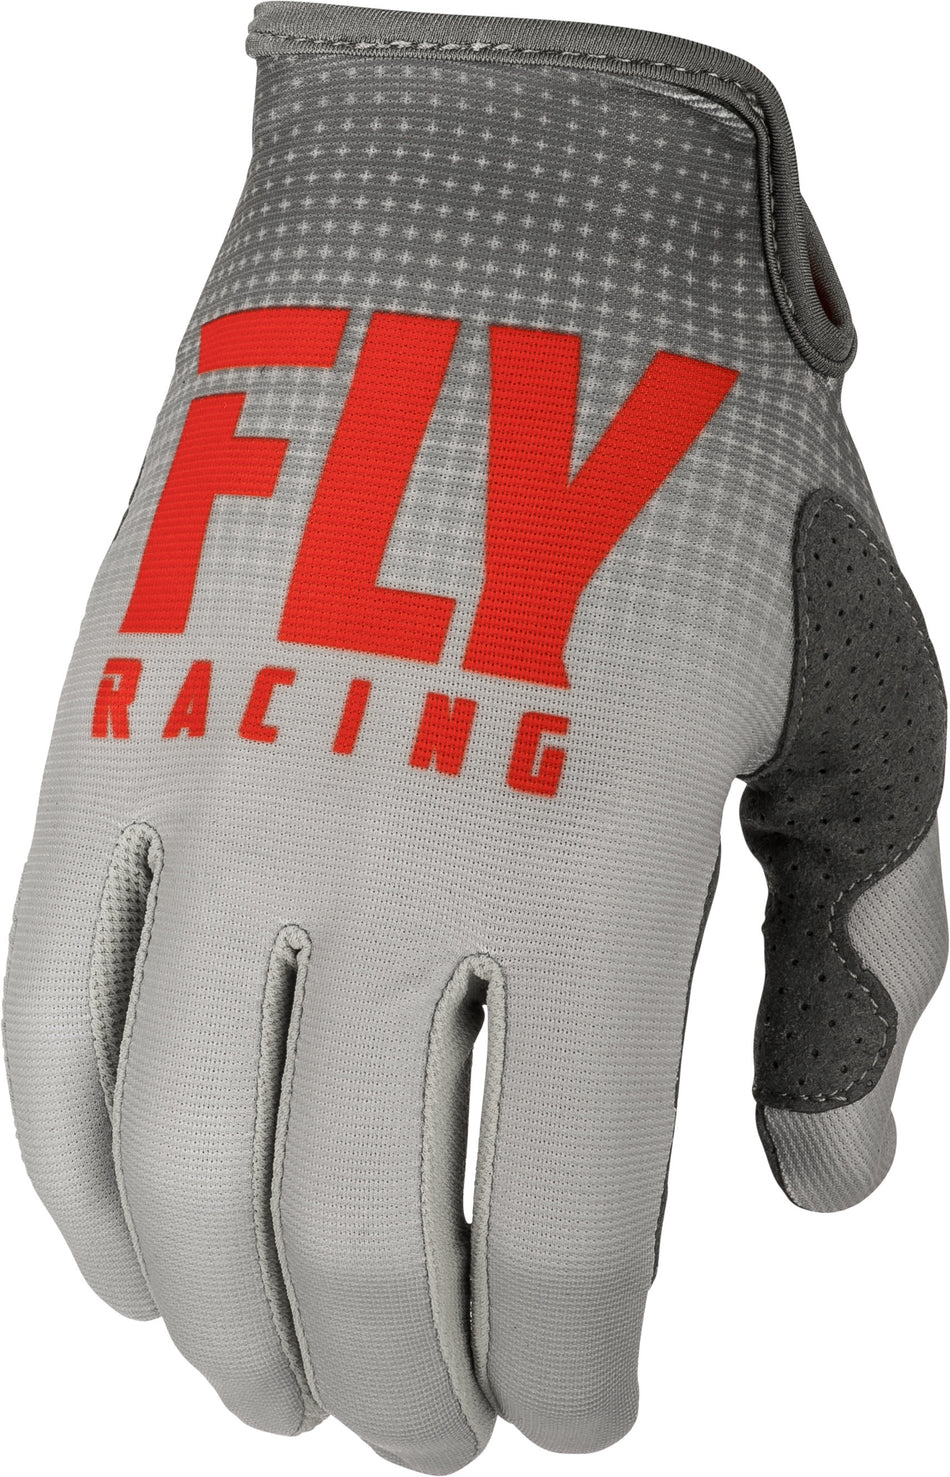 FLY RACING Lite Gloves Red/Grey Sz 12 372-01212